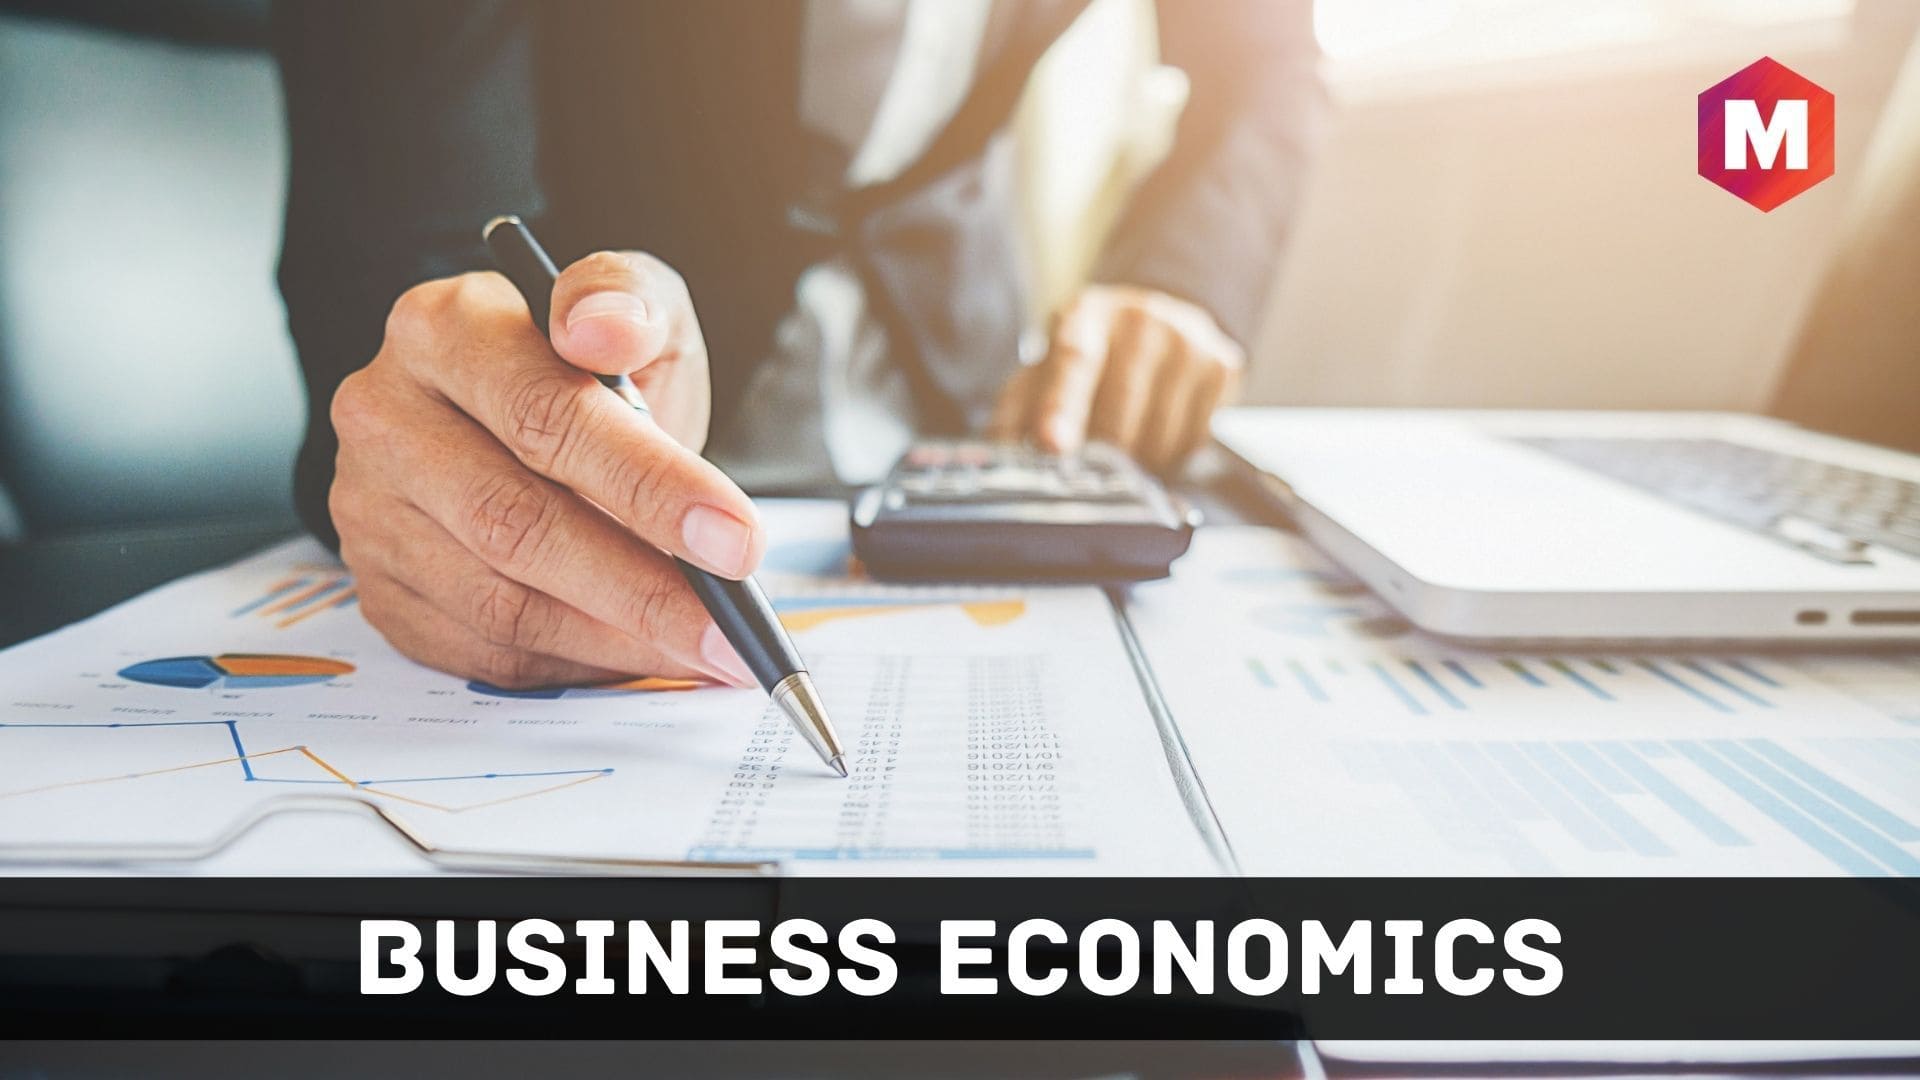 Business Economics - Definition, Features and Types | Marketing91